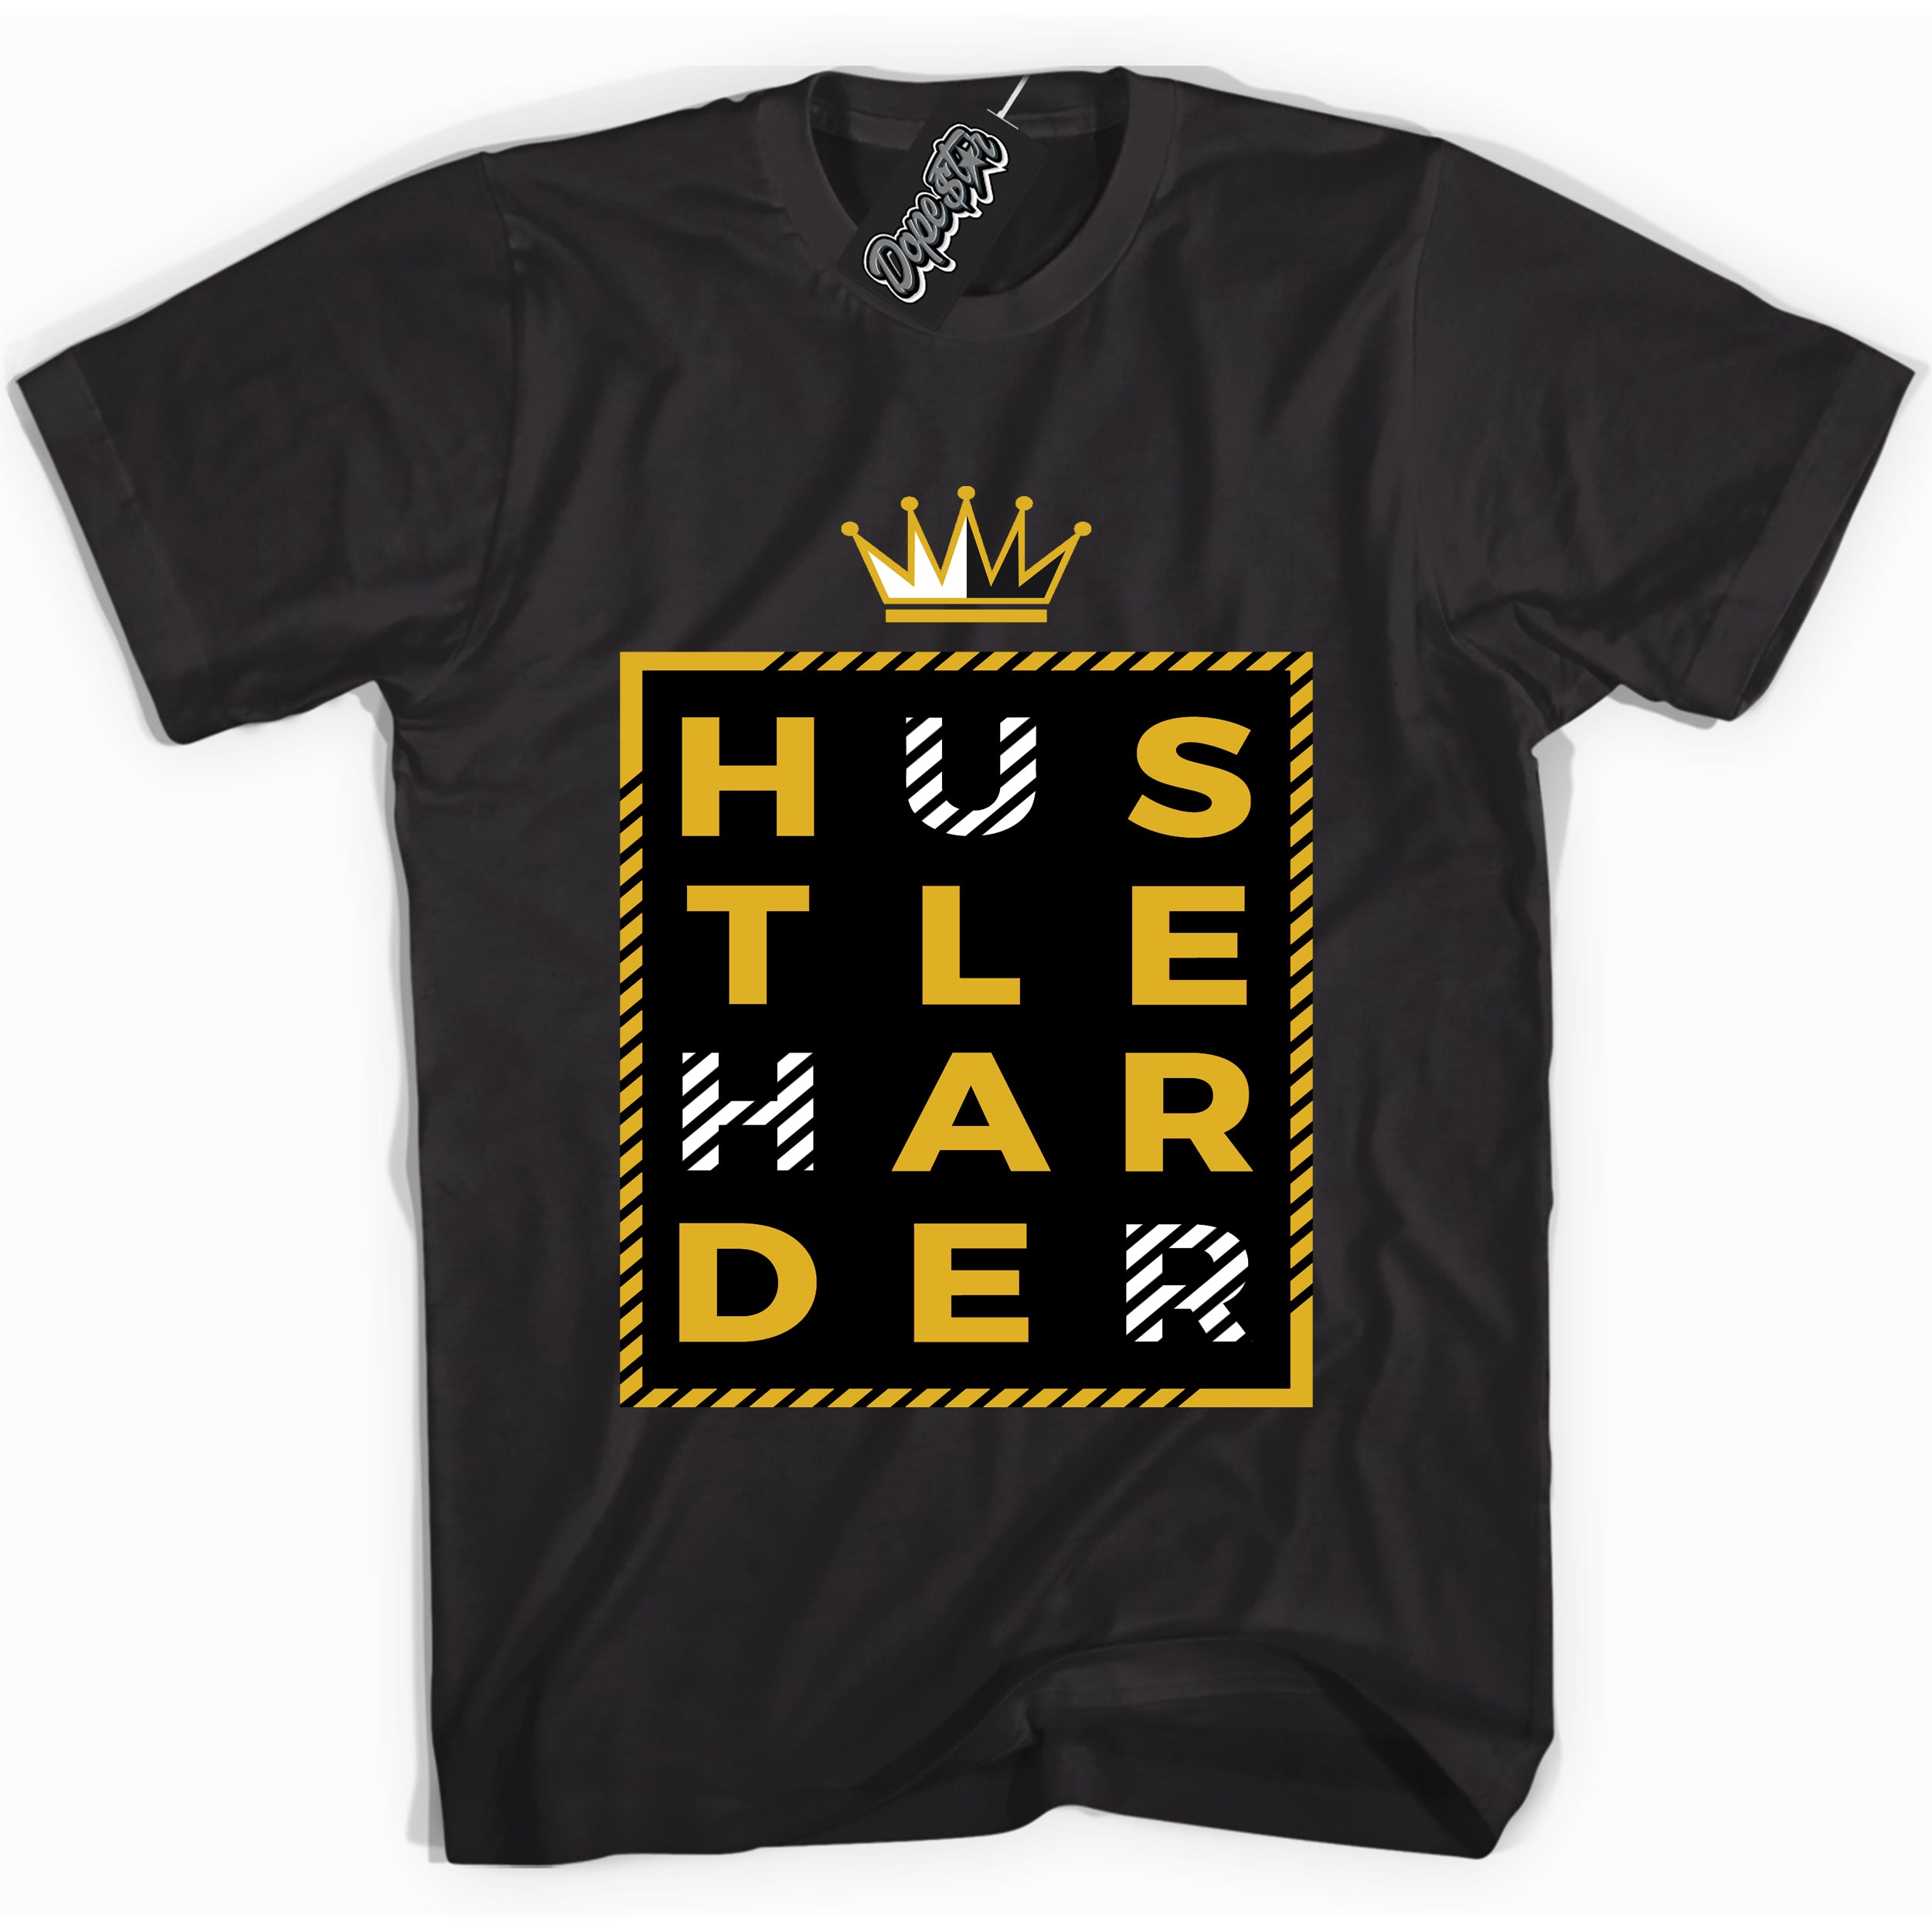 Cool Black Shirt With Hustle Harder design That Perfectly Matches AIR JORDAN 6 RETRO YELLOW OCHRE Sneakers.